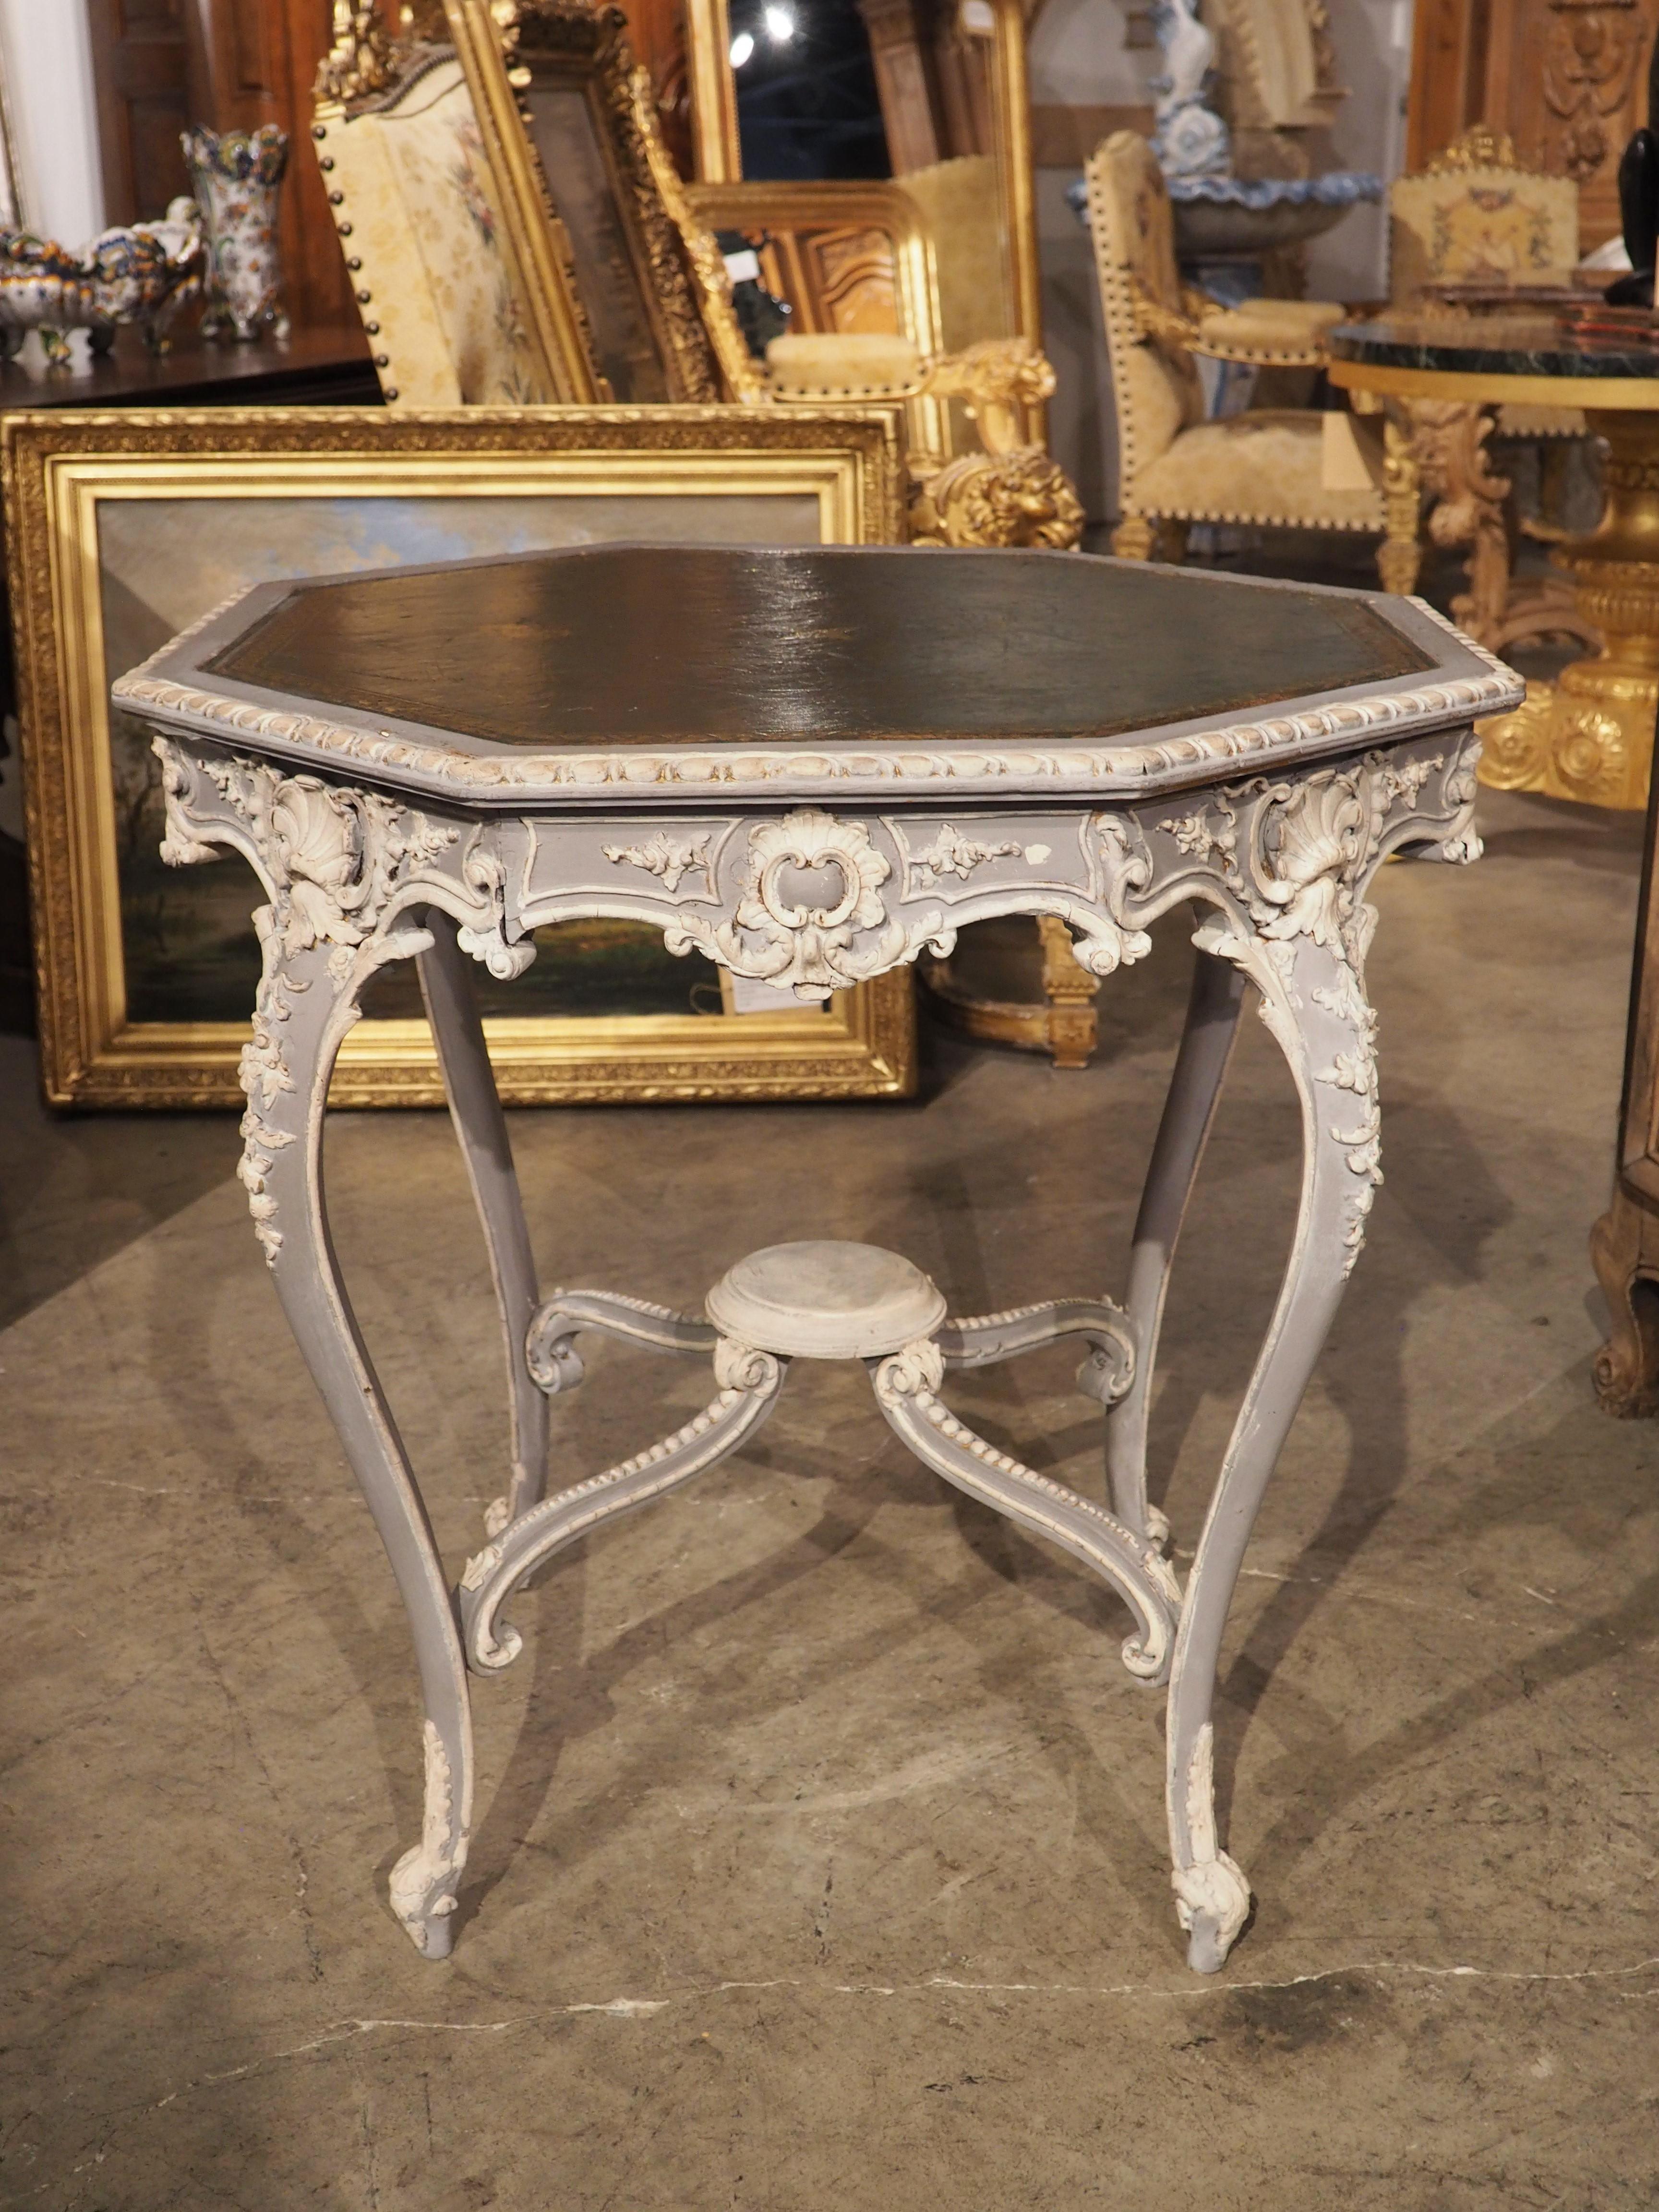 A beautiful example of Louis XV style, this painted side table with leather top was hand-carved in France during the latter half of the 1800’s. The octagonal top table has been covered with a deep green leather that has been adorned with a gold